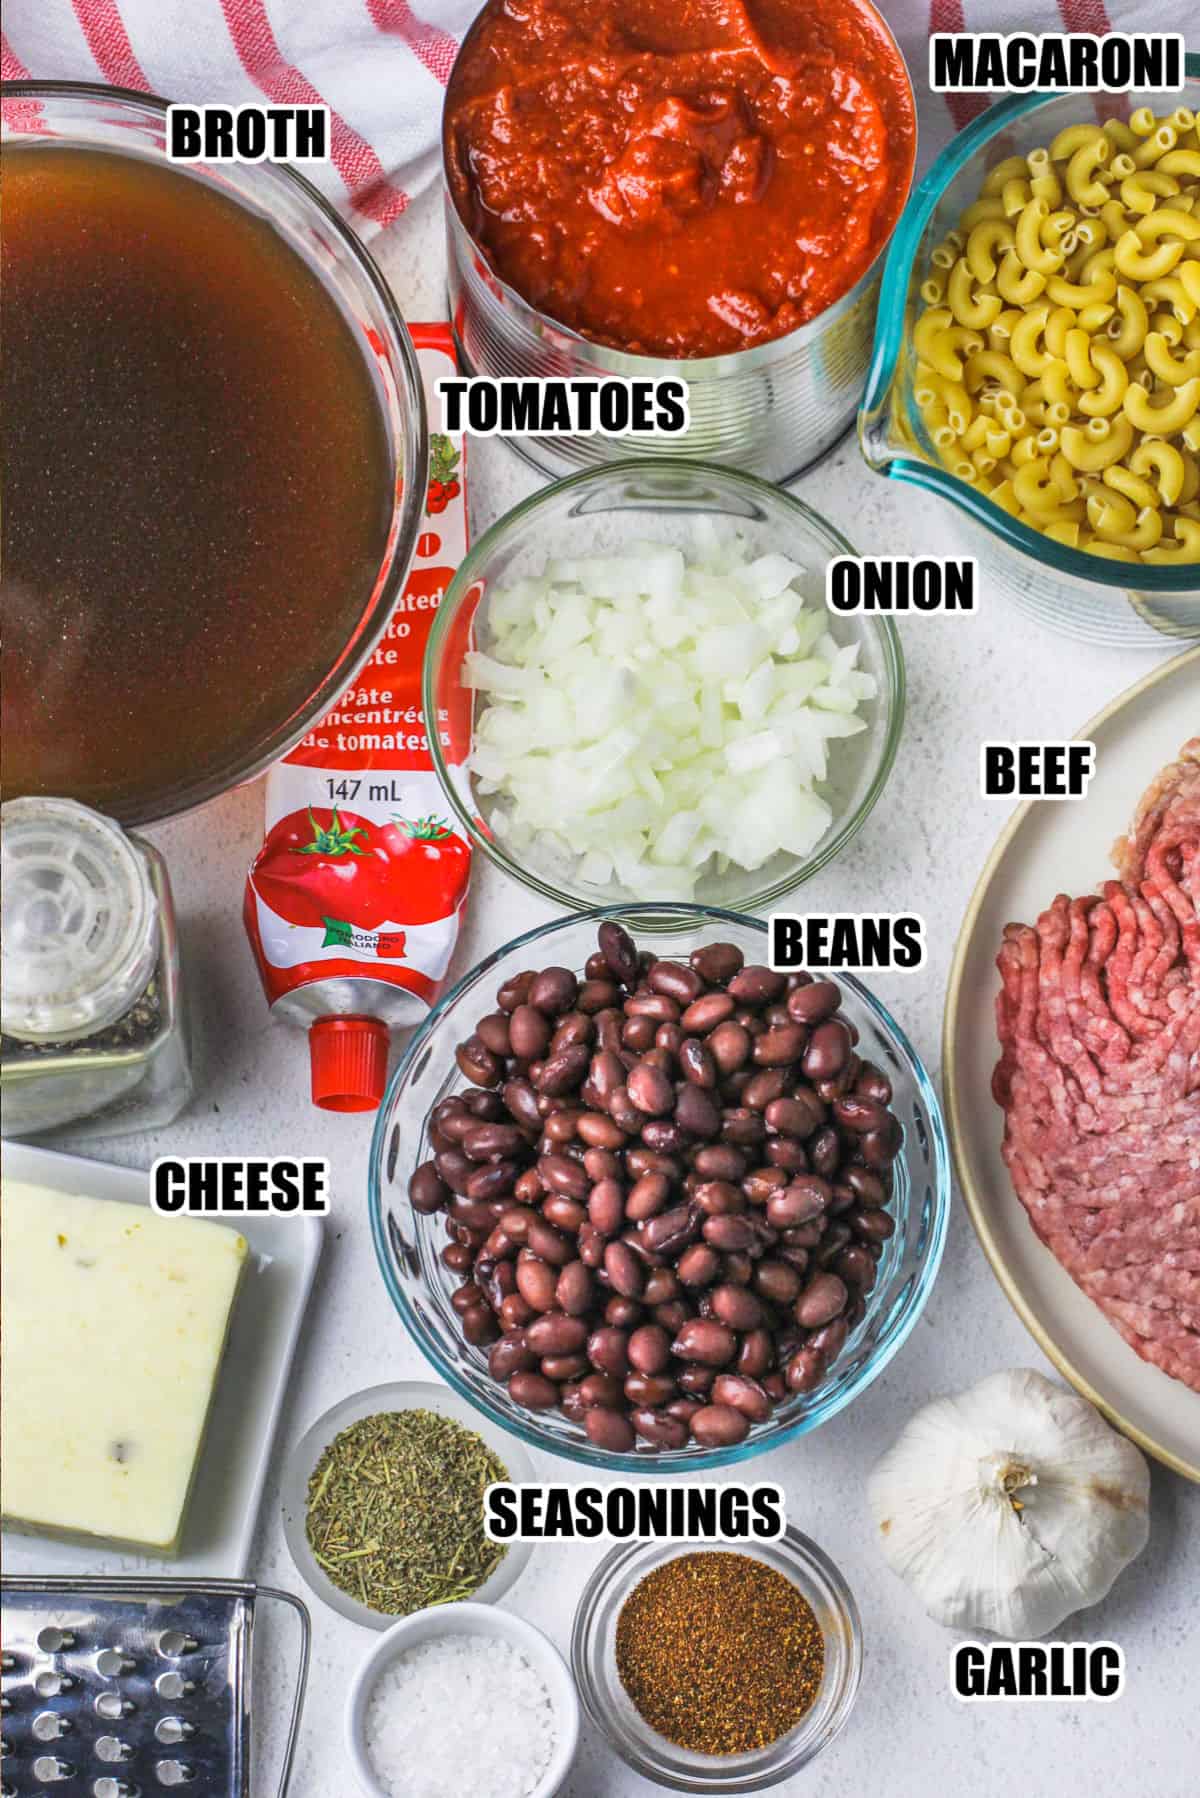 broth , tomatoes , macaroni , onion , beef , beans , cheese, garlic and seasonings to make Chili Mac Recipe with labels